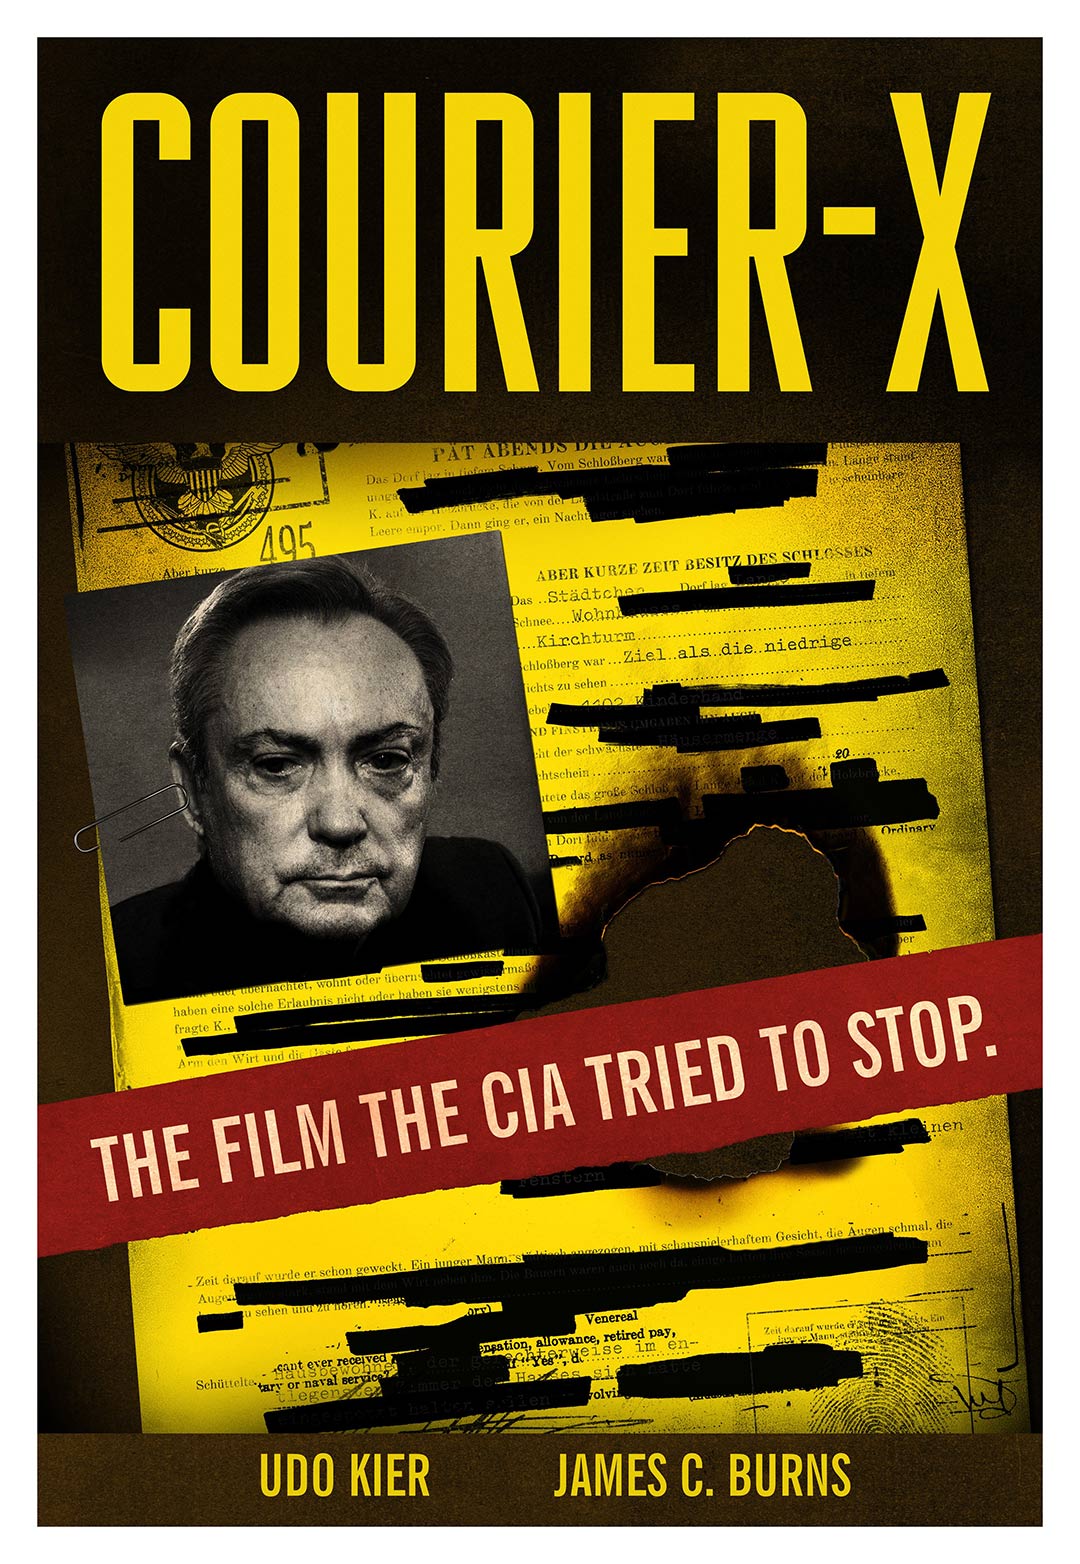 Courier X (2016) Poster 1 Trailer Addict